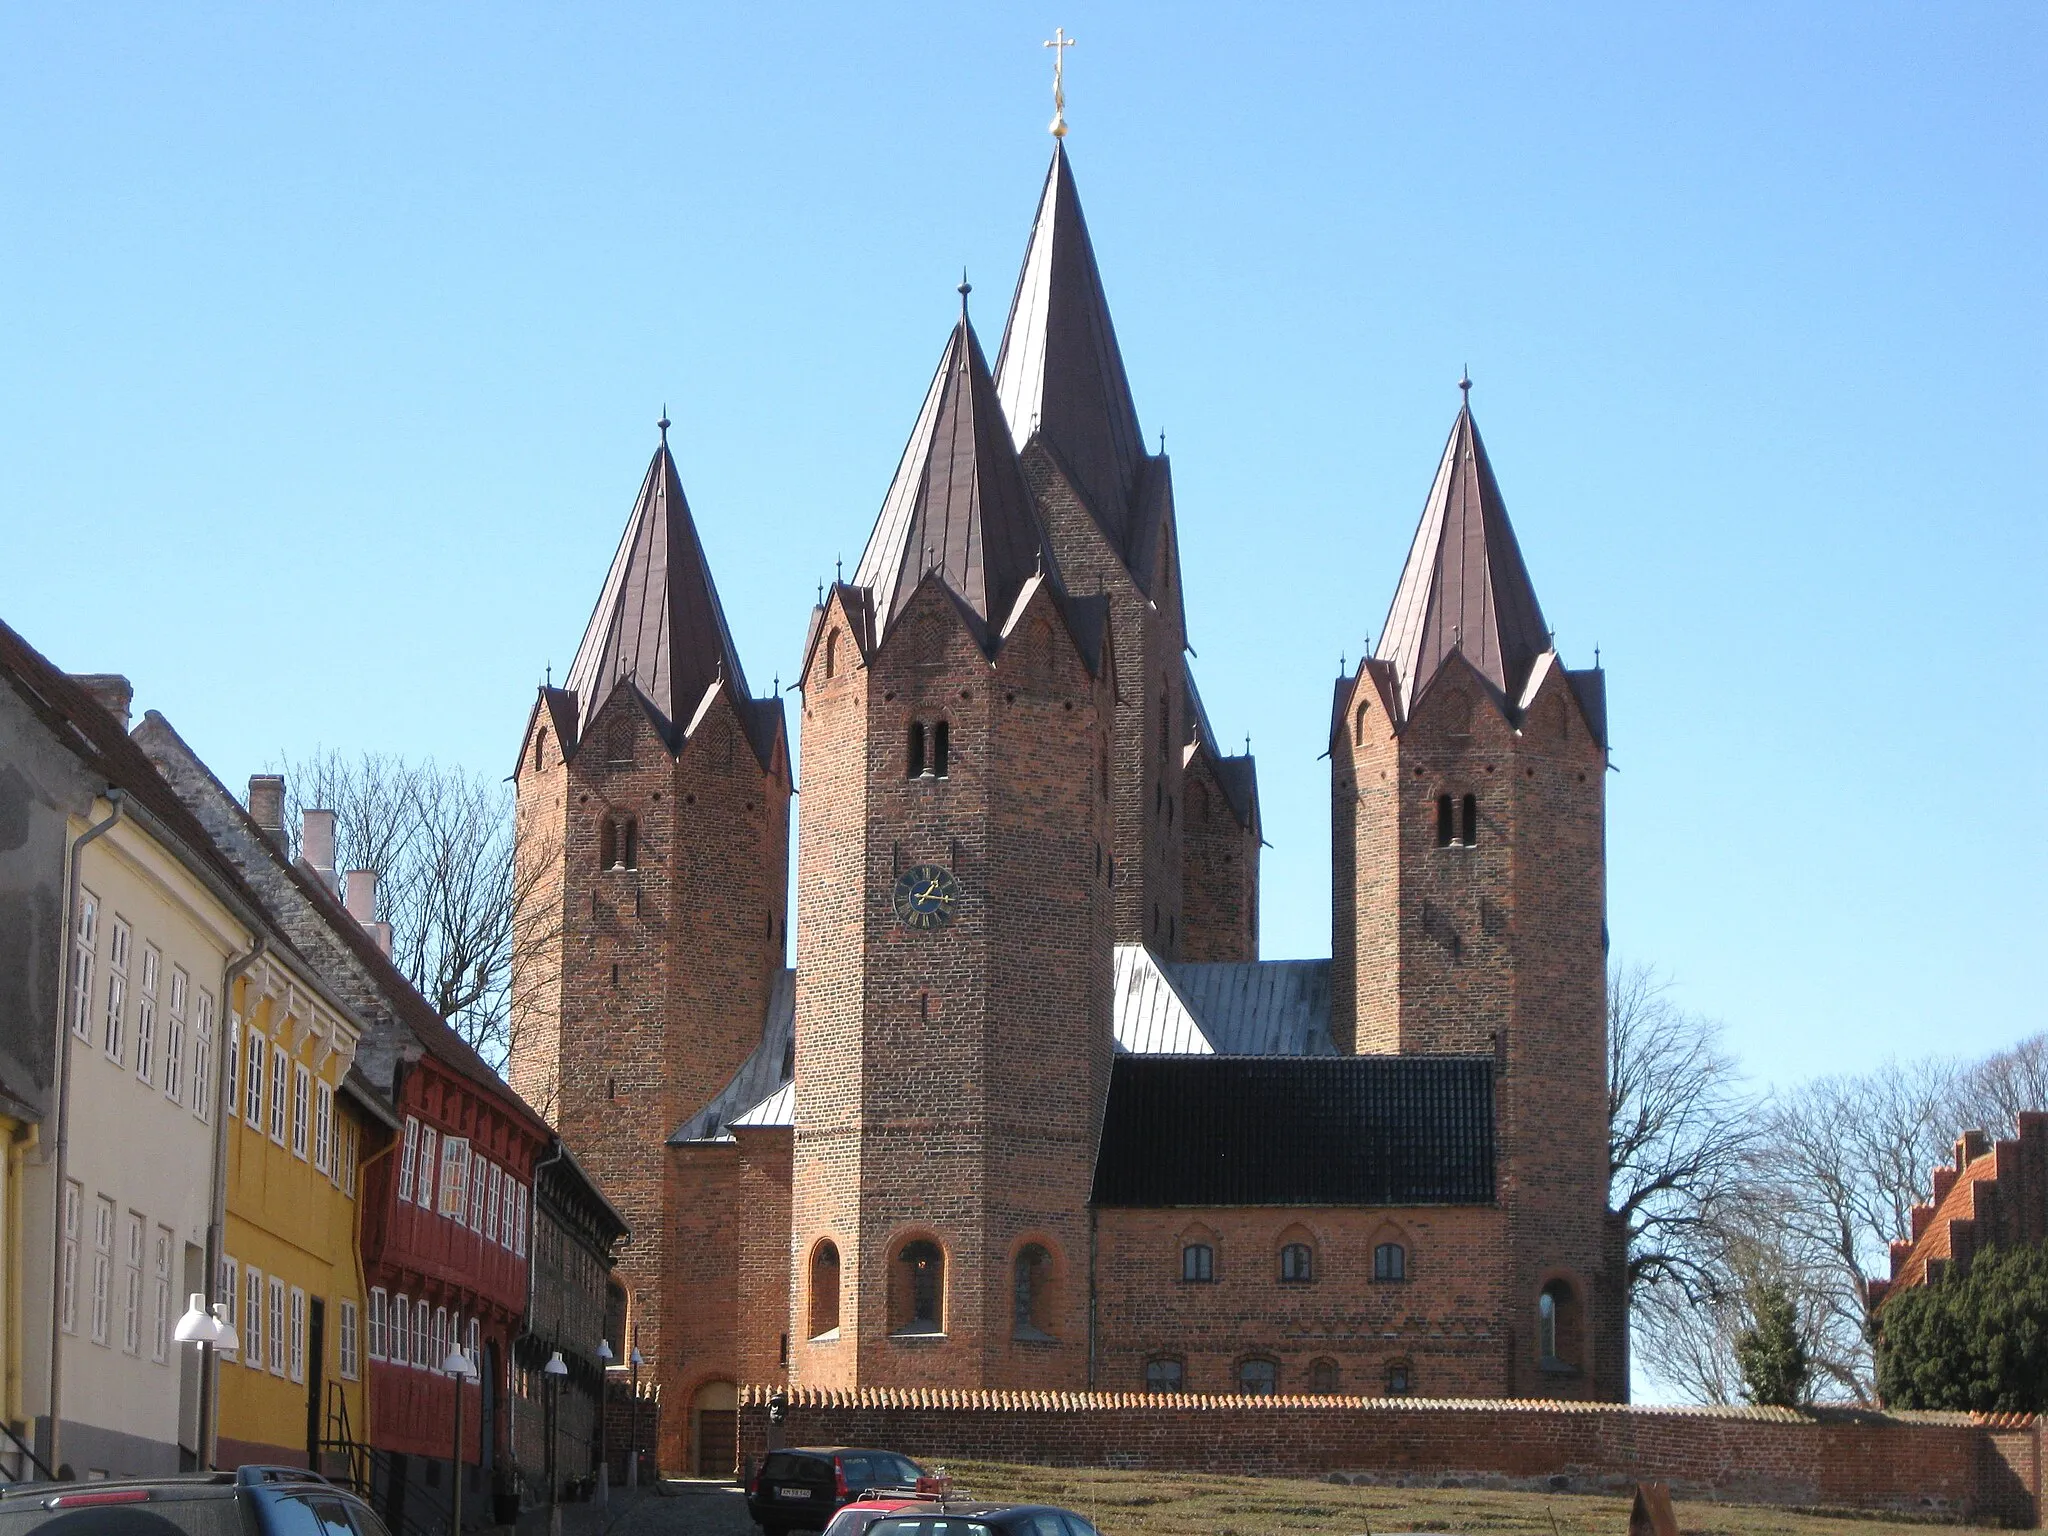 Photo showing: The church "Vor Frue Kirke" in the town Kalundborg. The town is located in West Zealand, Denmark.